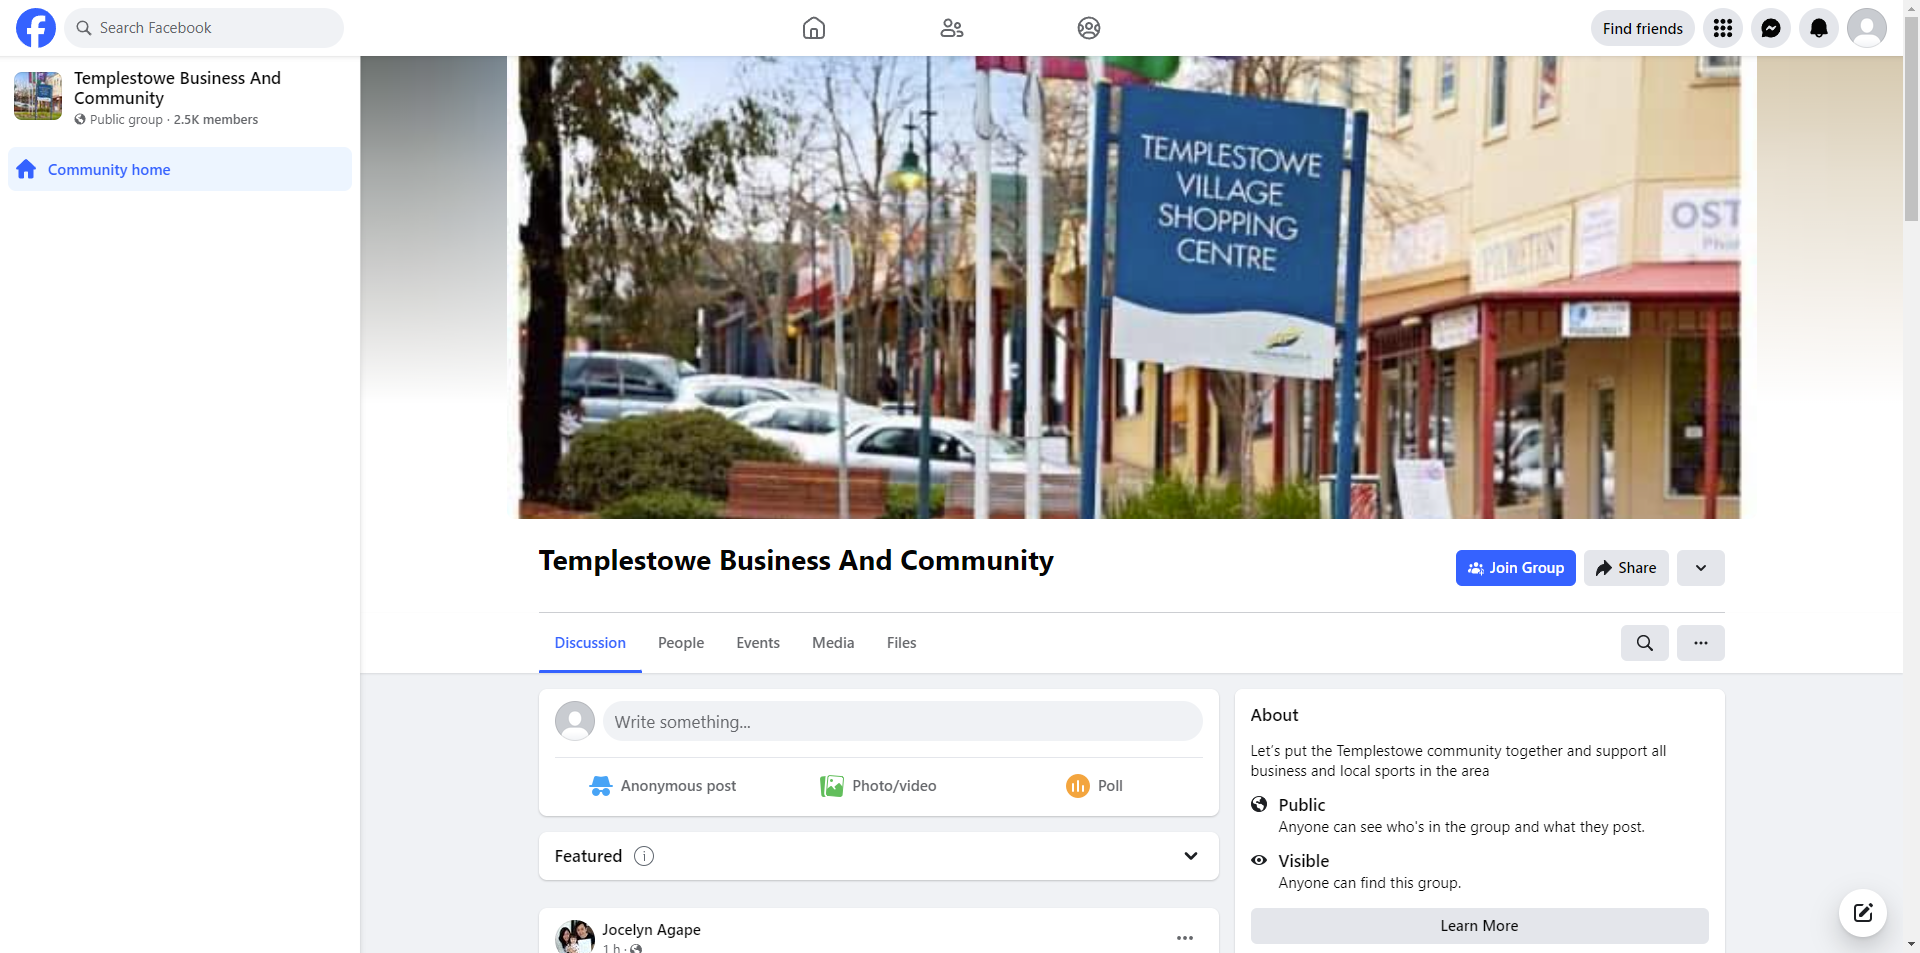 Templestowe Business and Community